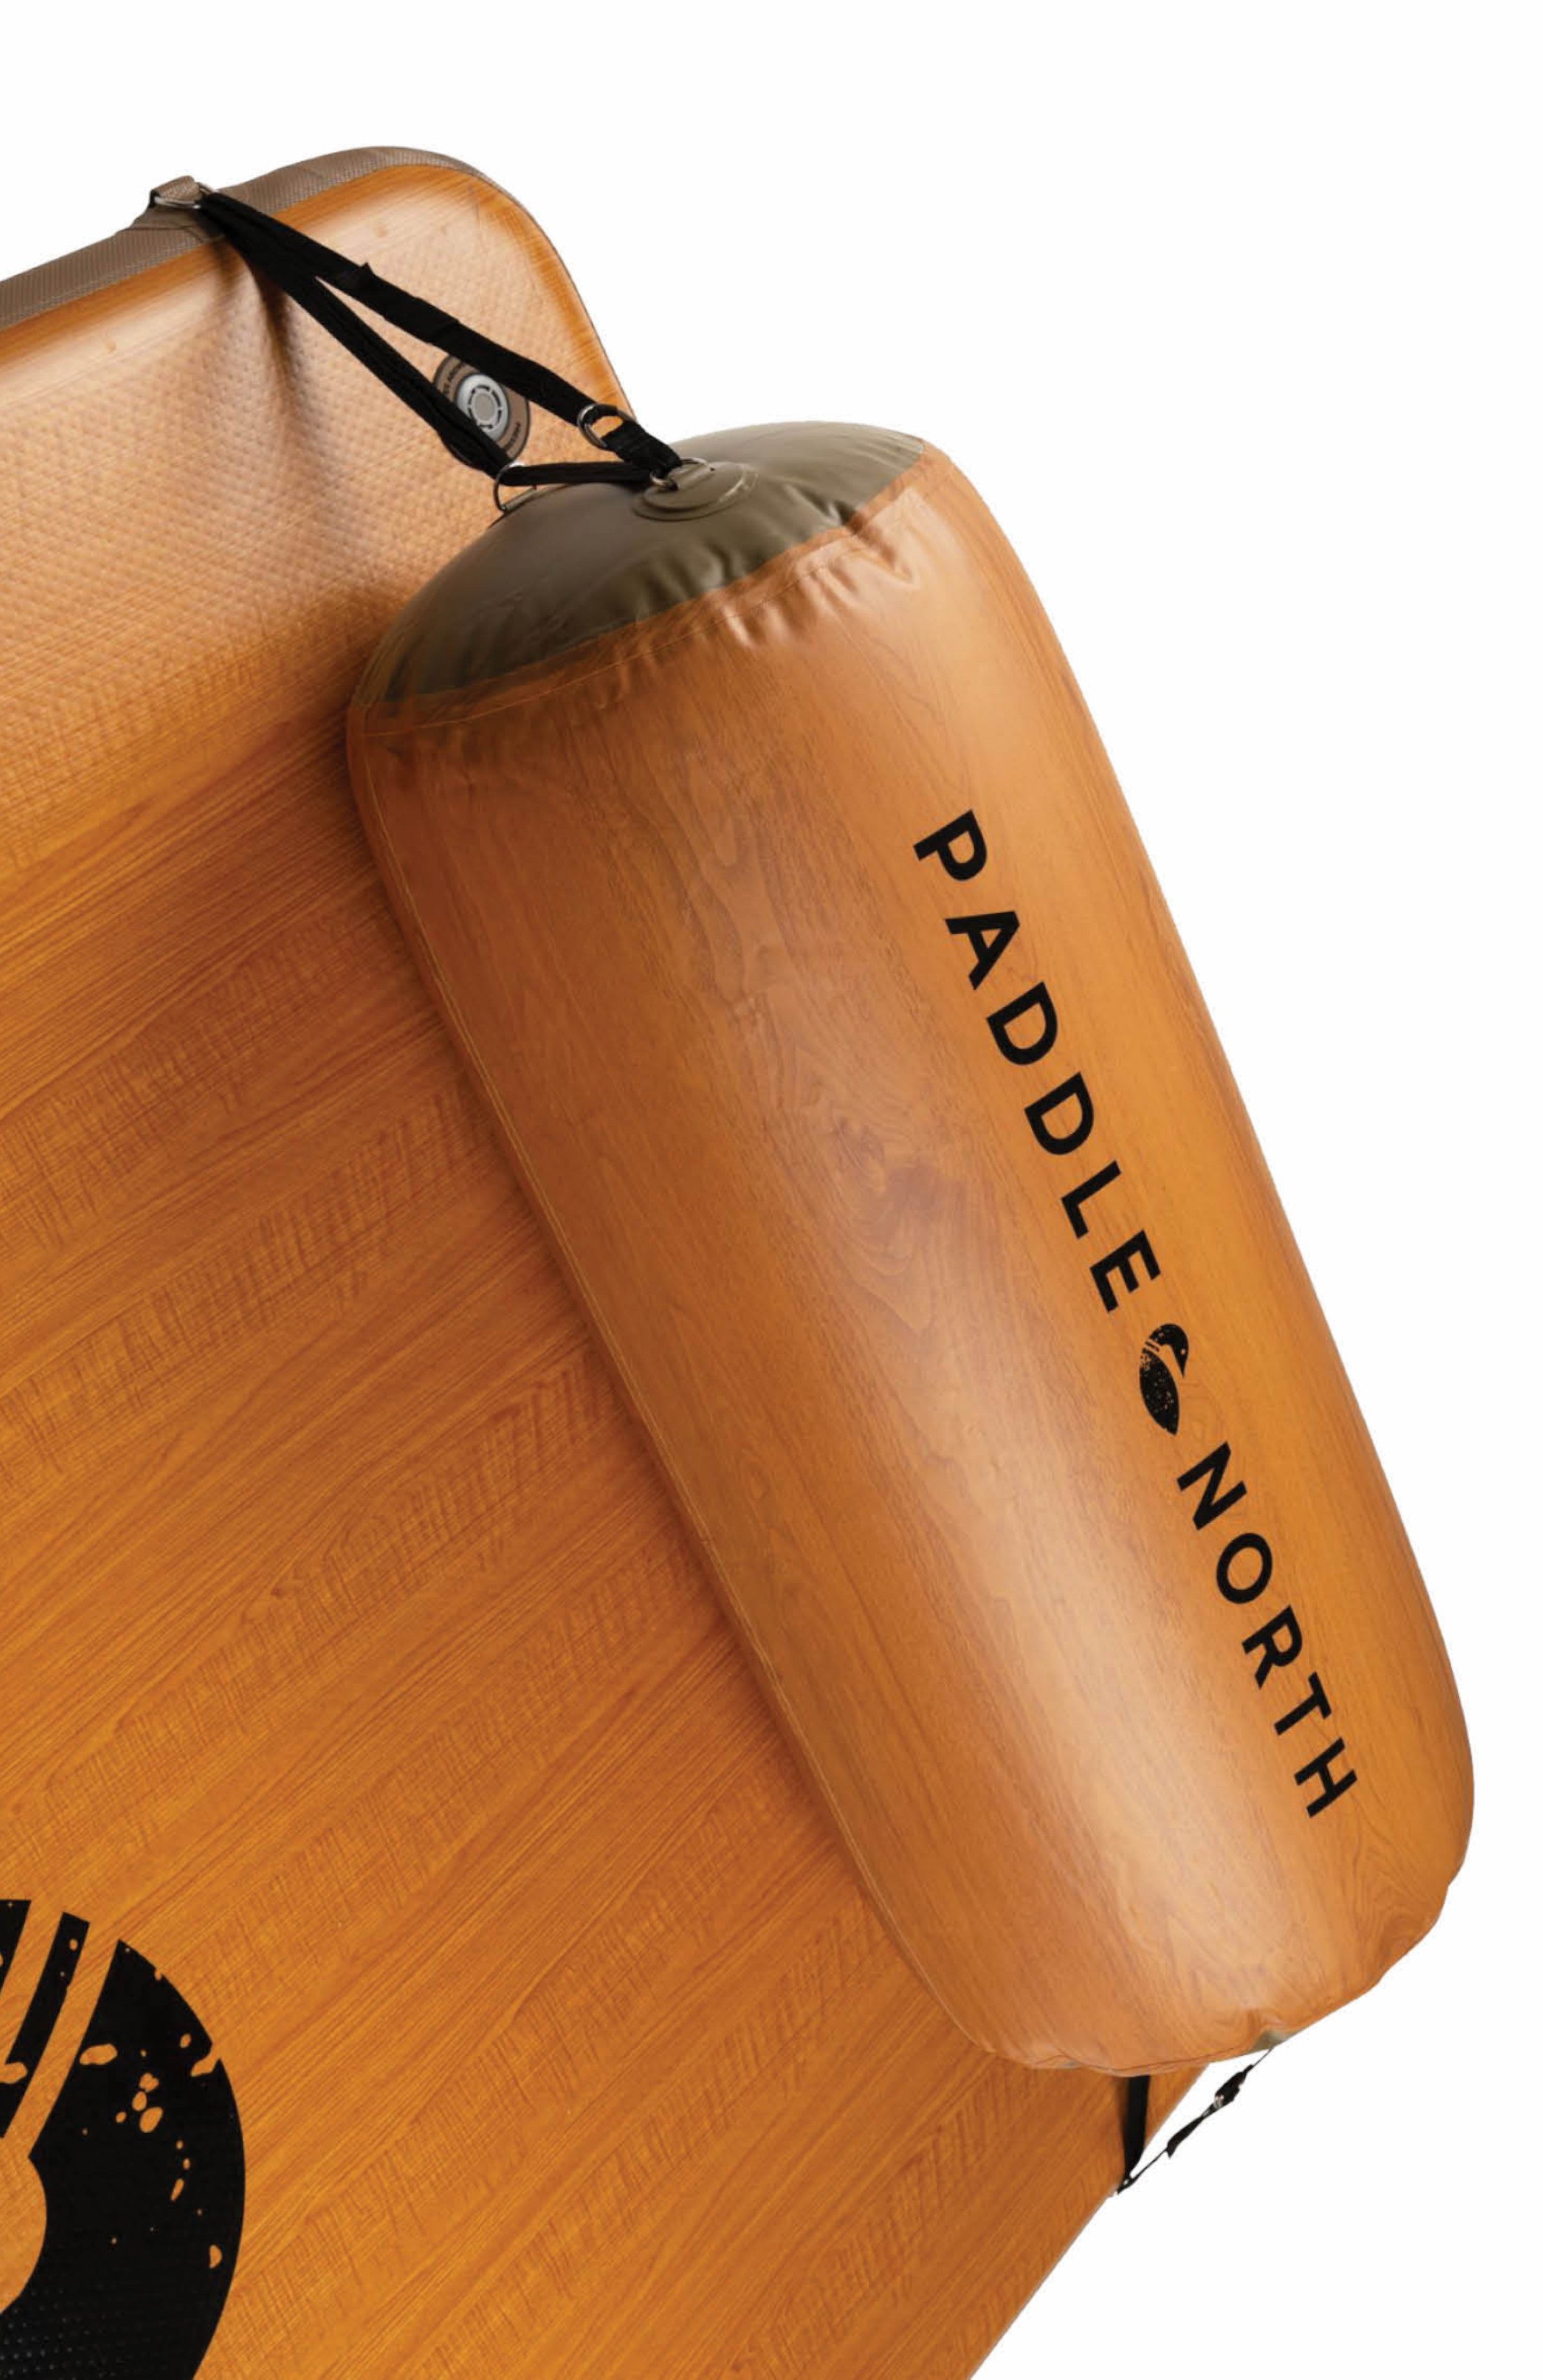 Dock accessories: a dock log installed on a paddle north raft.